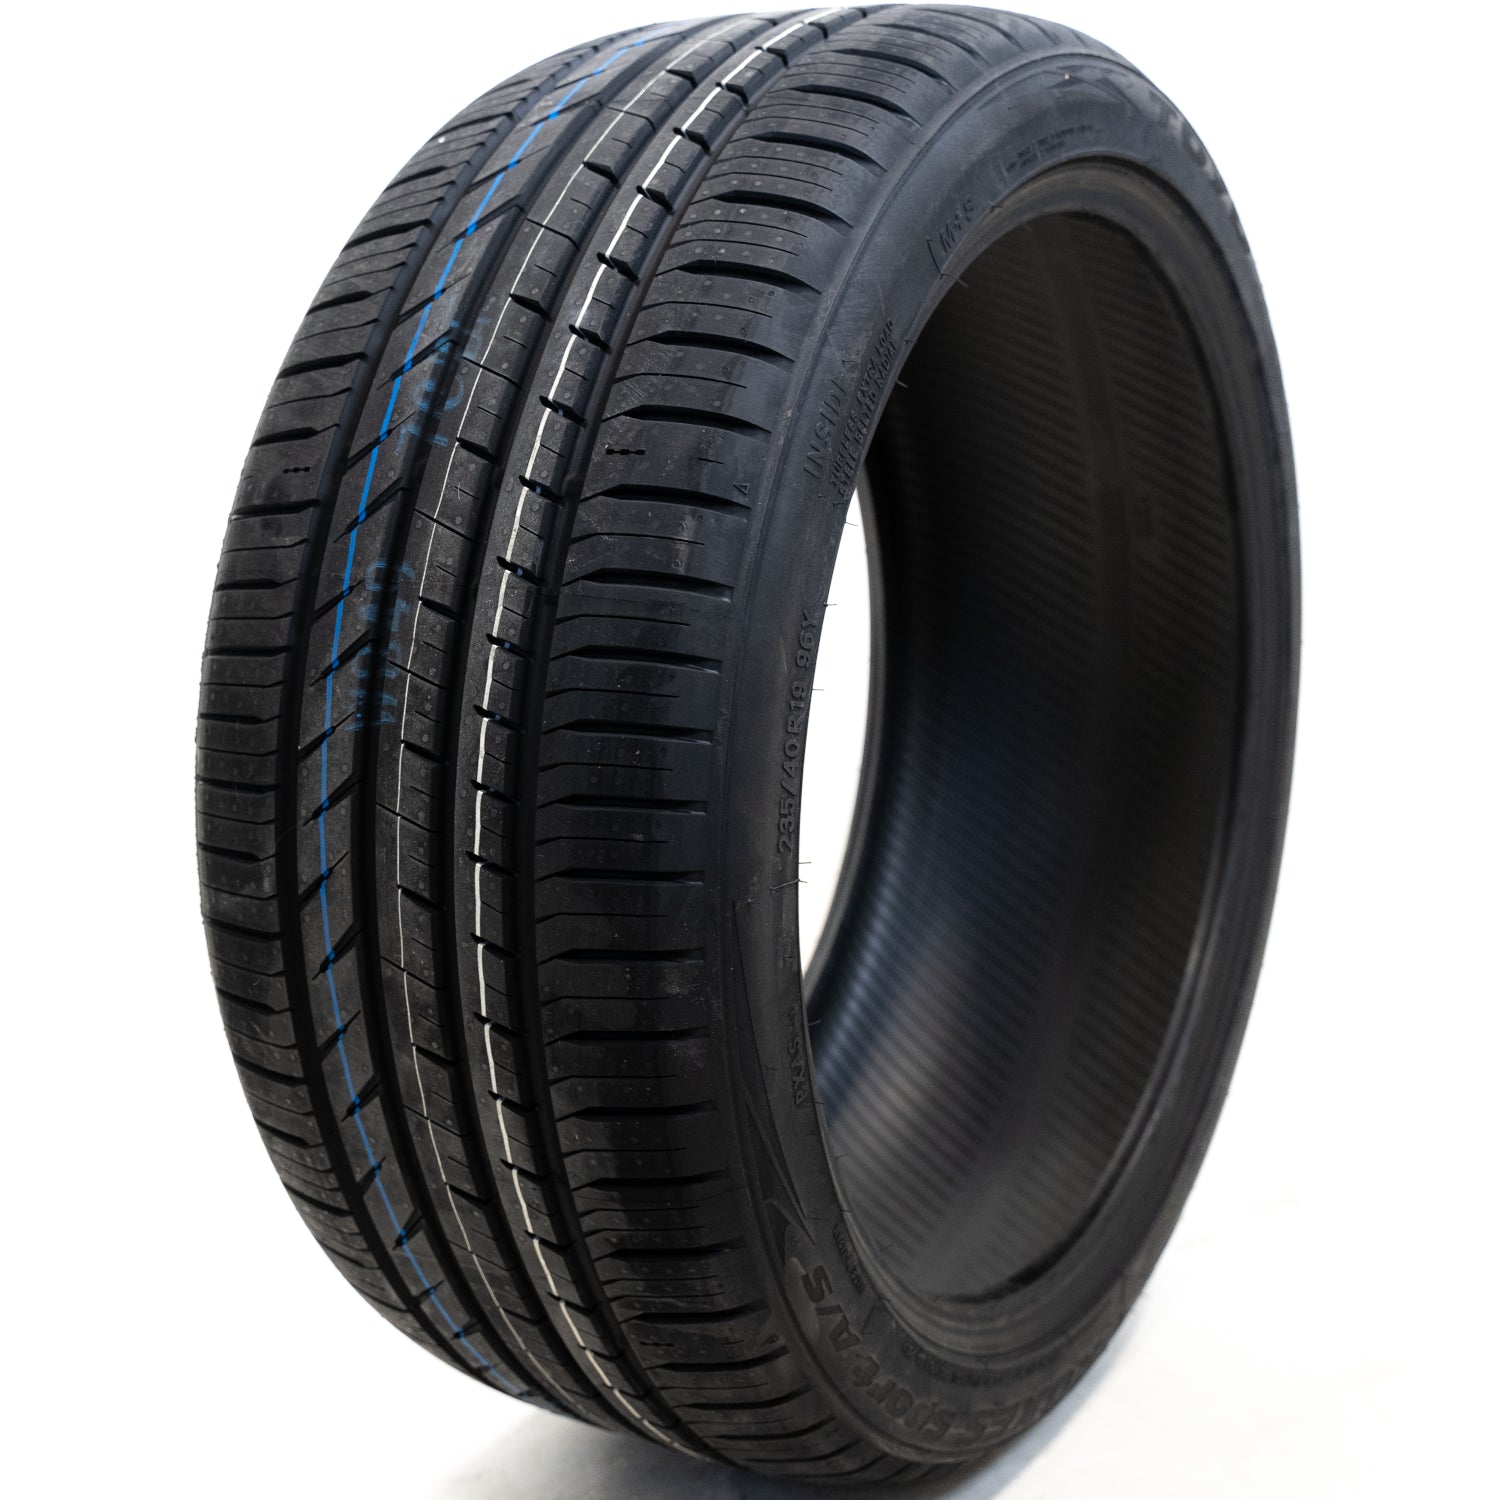 TOYO TIRES PROXES SPORT A/S 215/40R18 XL (24.8X8.5R 18) Tires